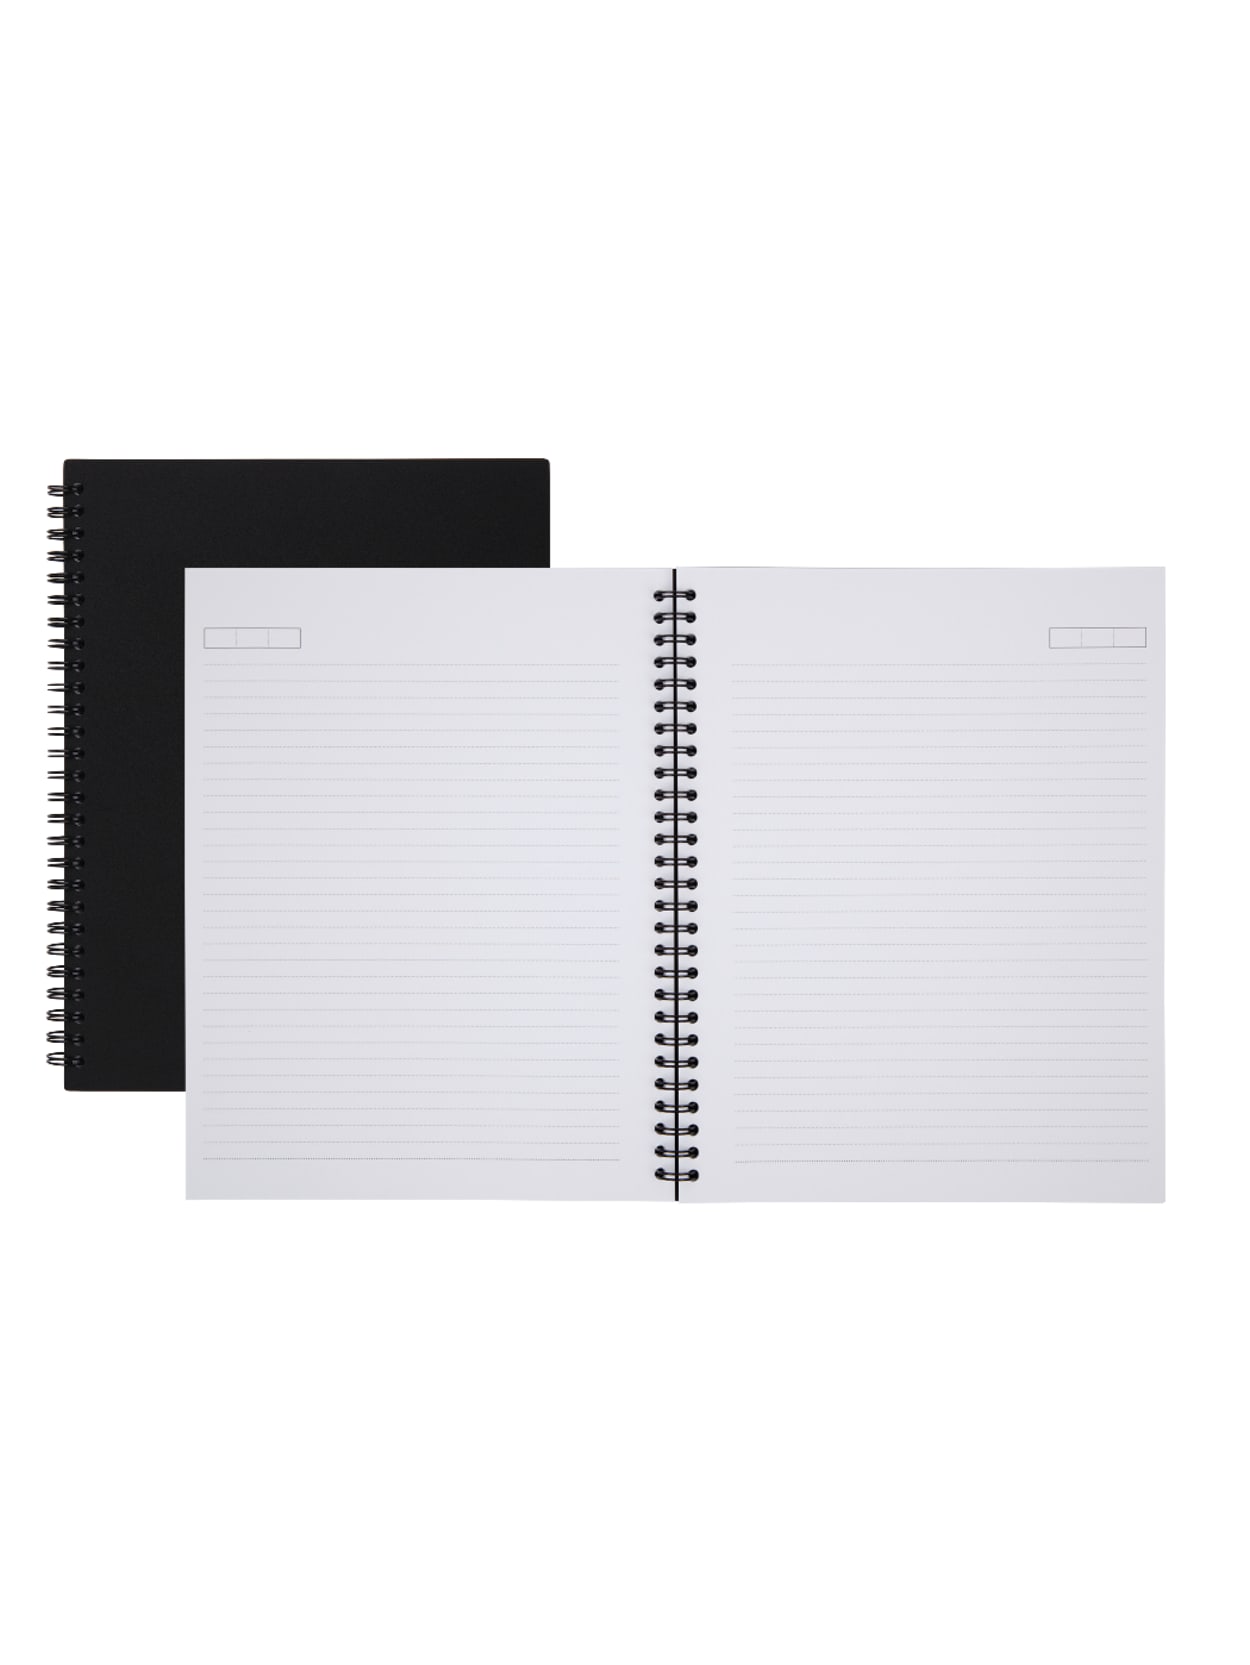 Office Depot Brand Wirebound Business Notebook 7 14 X 9 12 Narrow Ruled 160 Pages 80 Sheets Black Office Depot